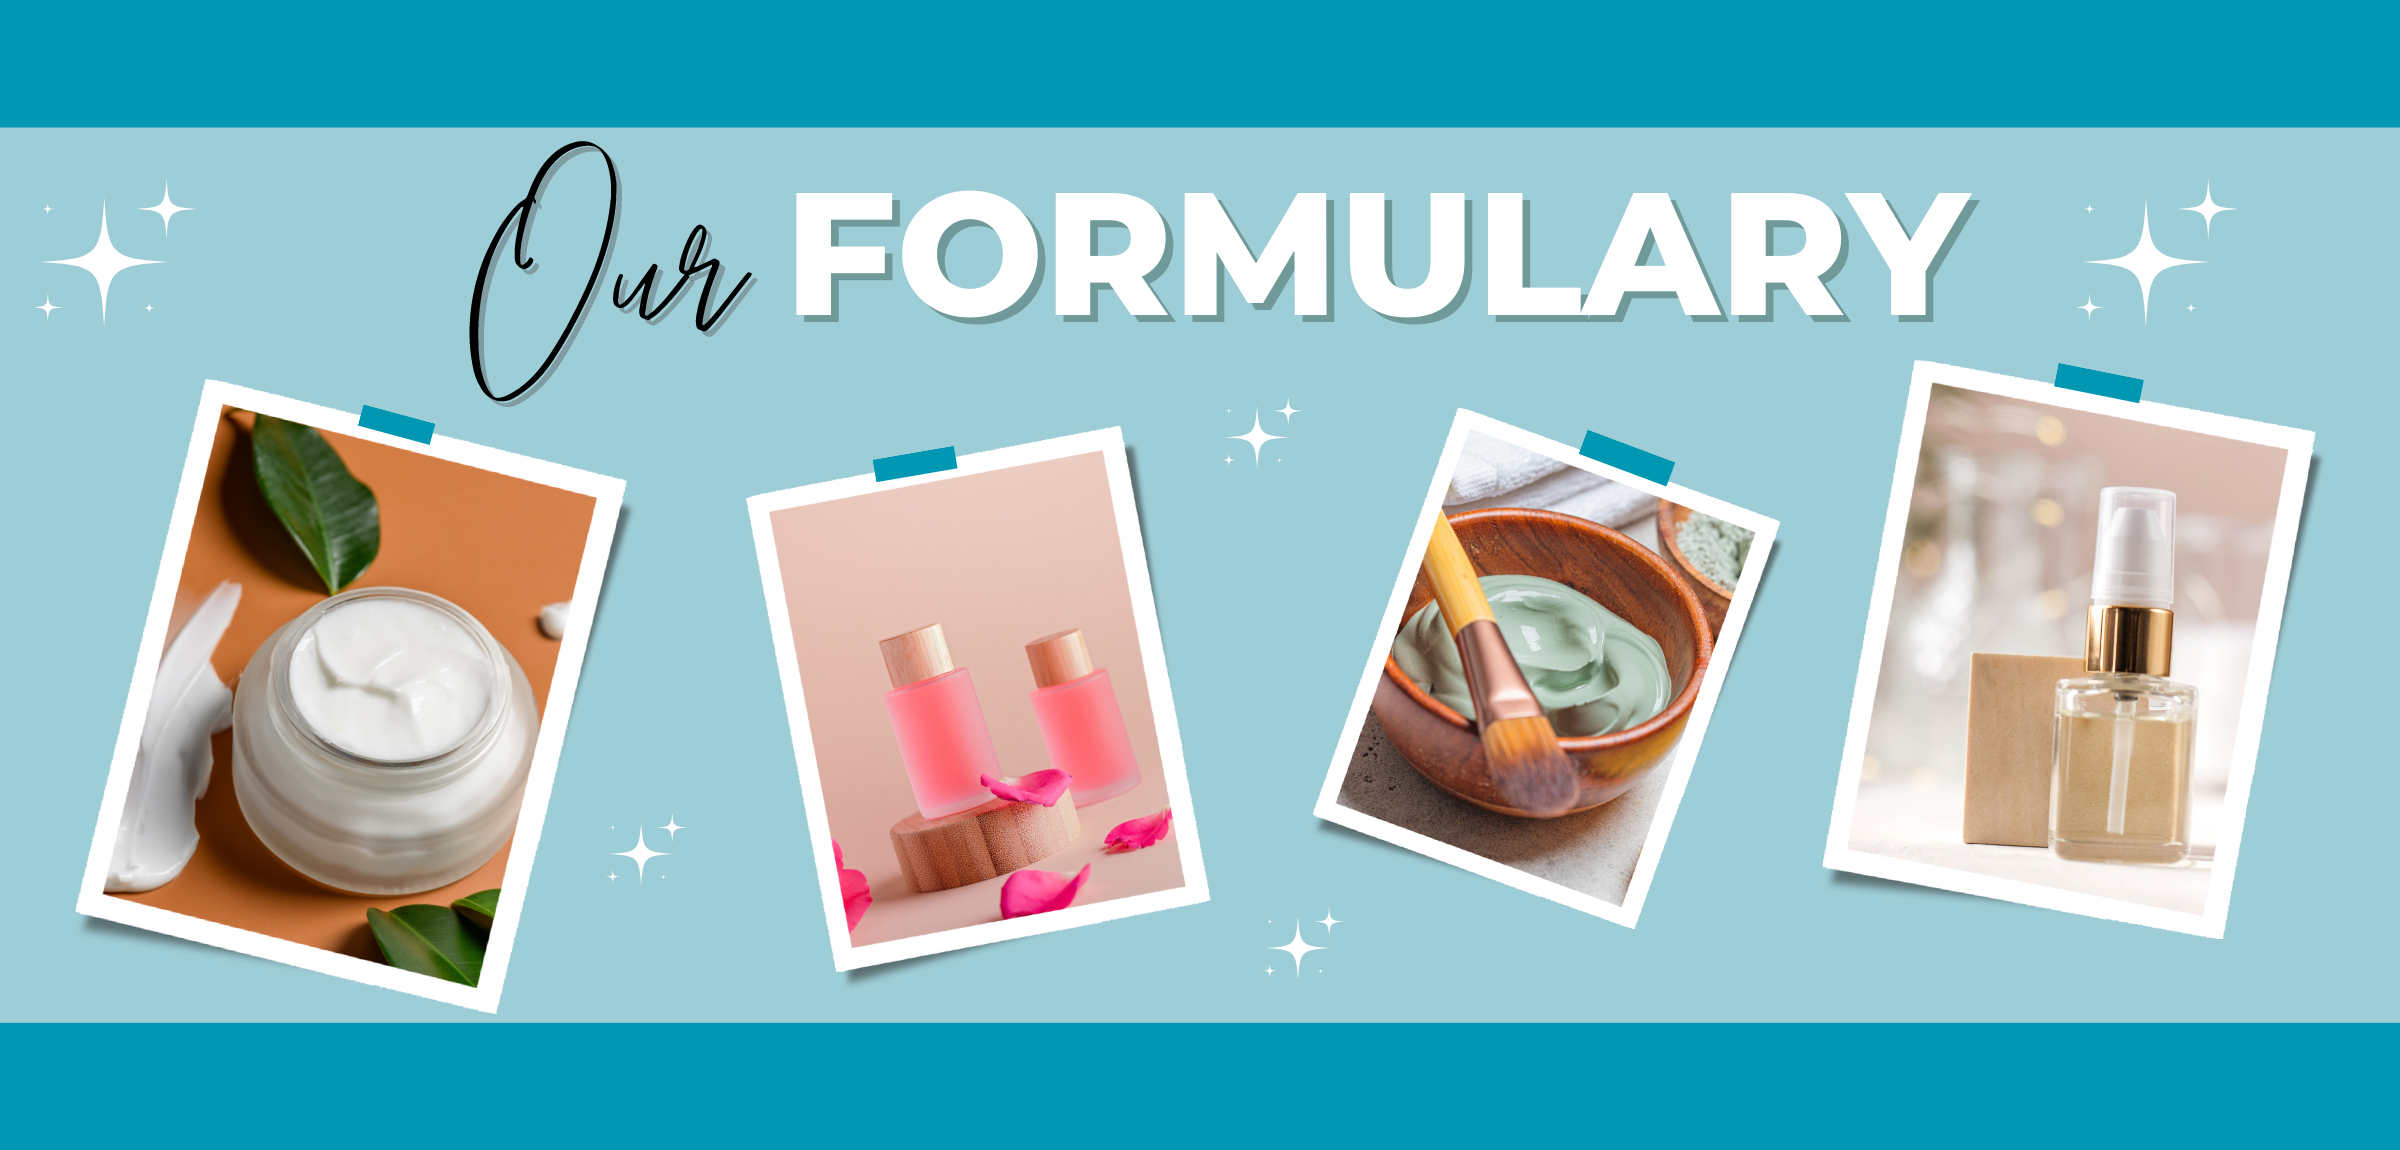 our formulary which includes sample formulas